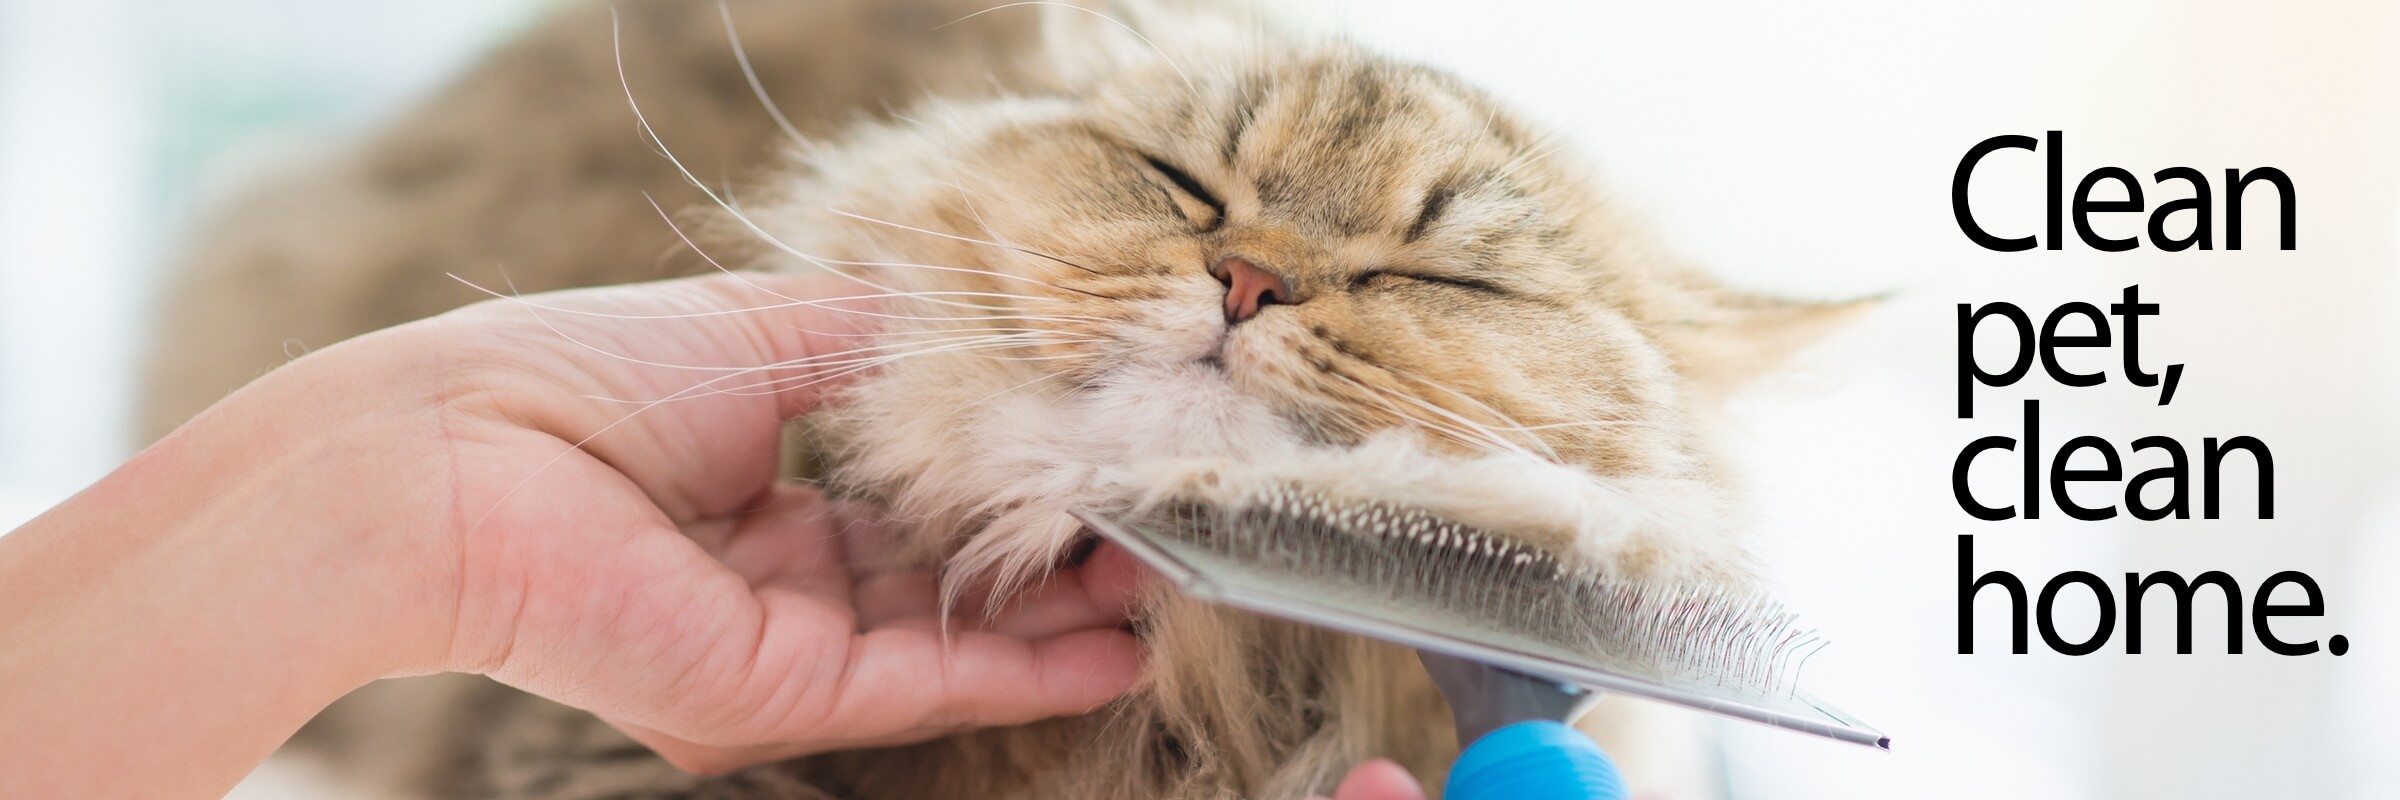 Clean Pet Clean Home Woman brushing Persian cat to remove loose hair